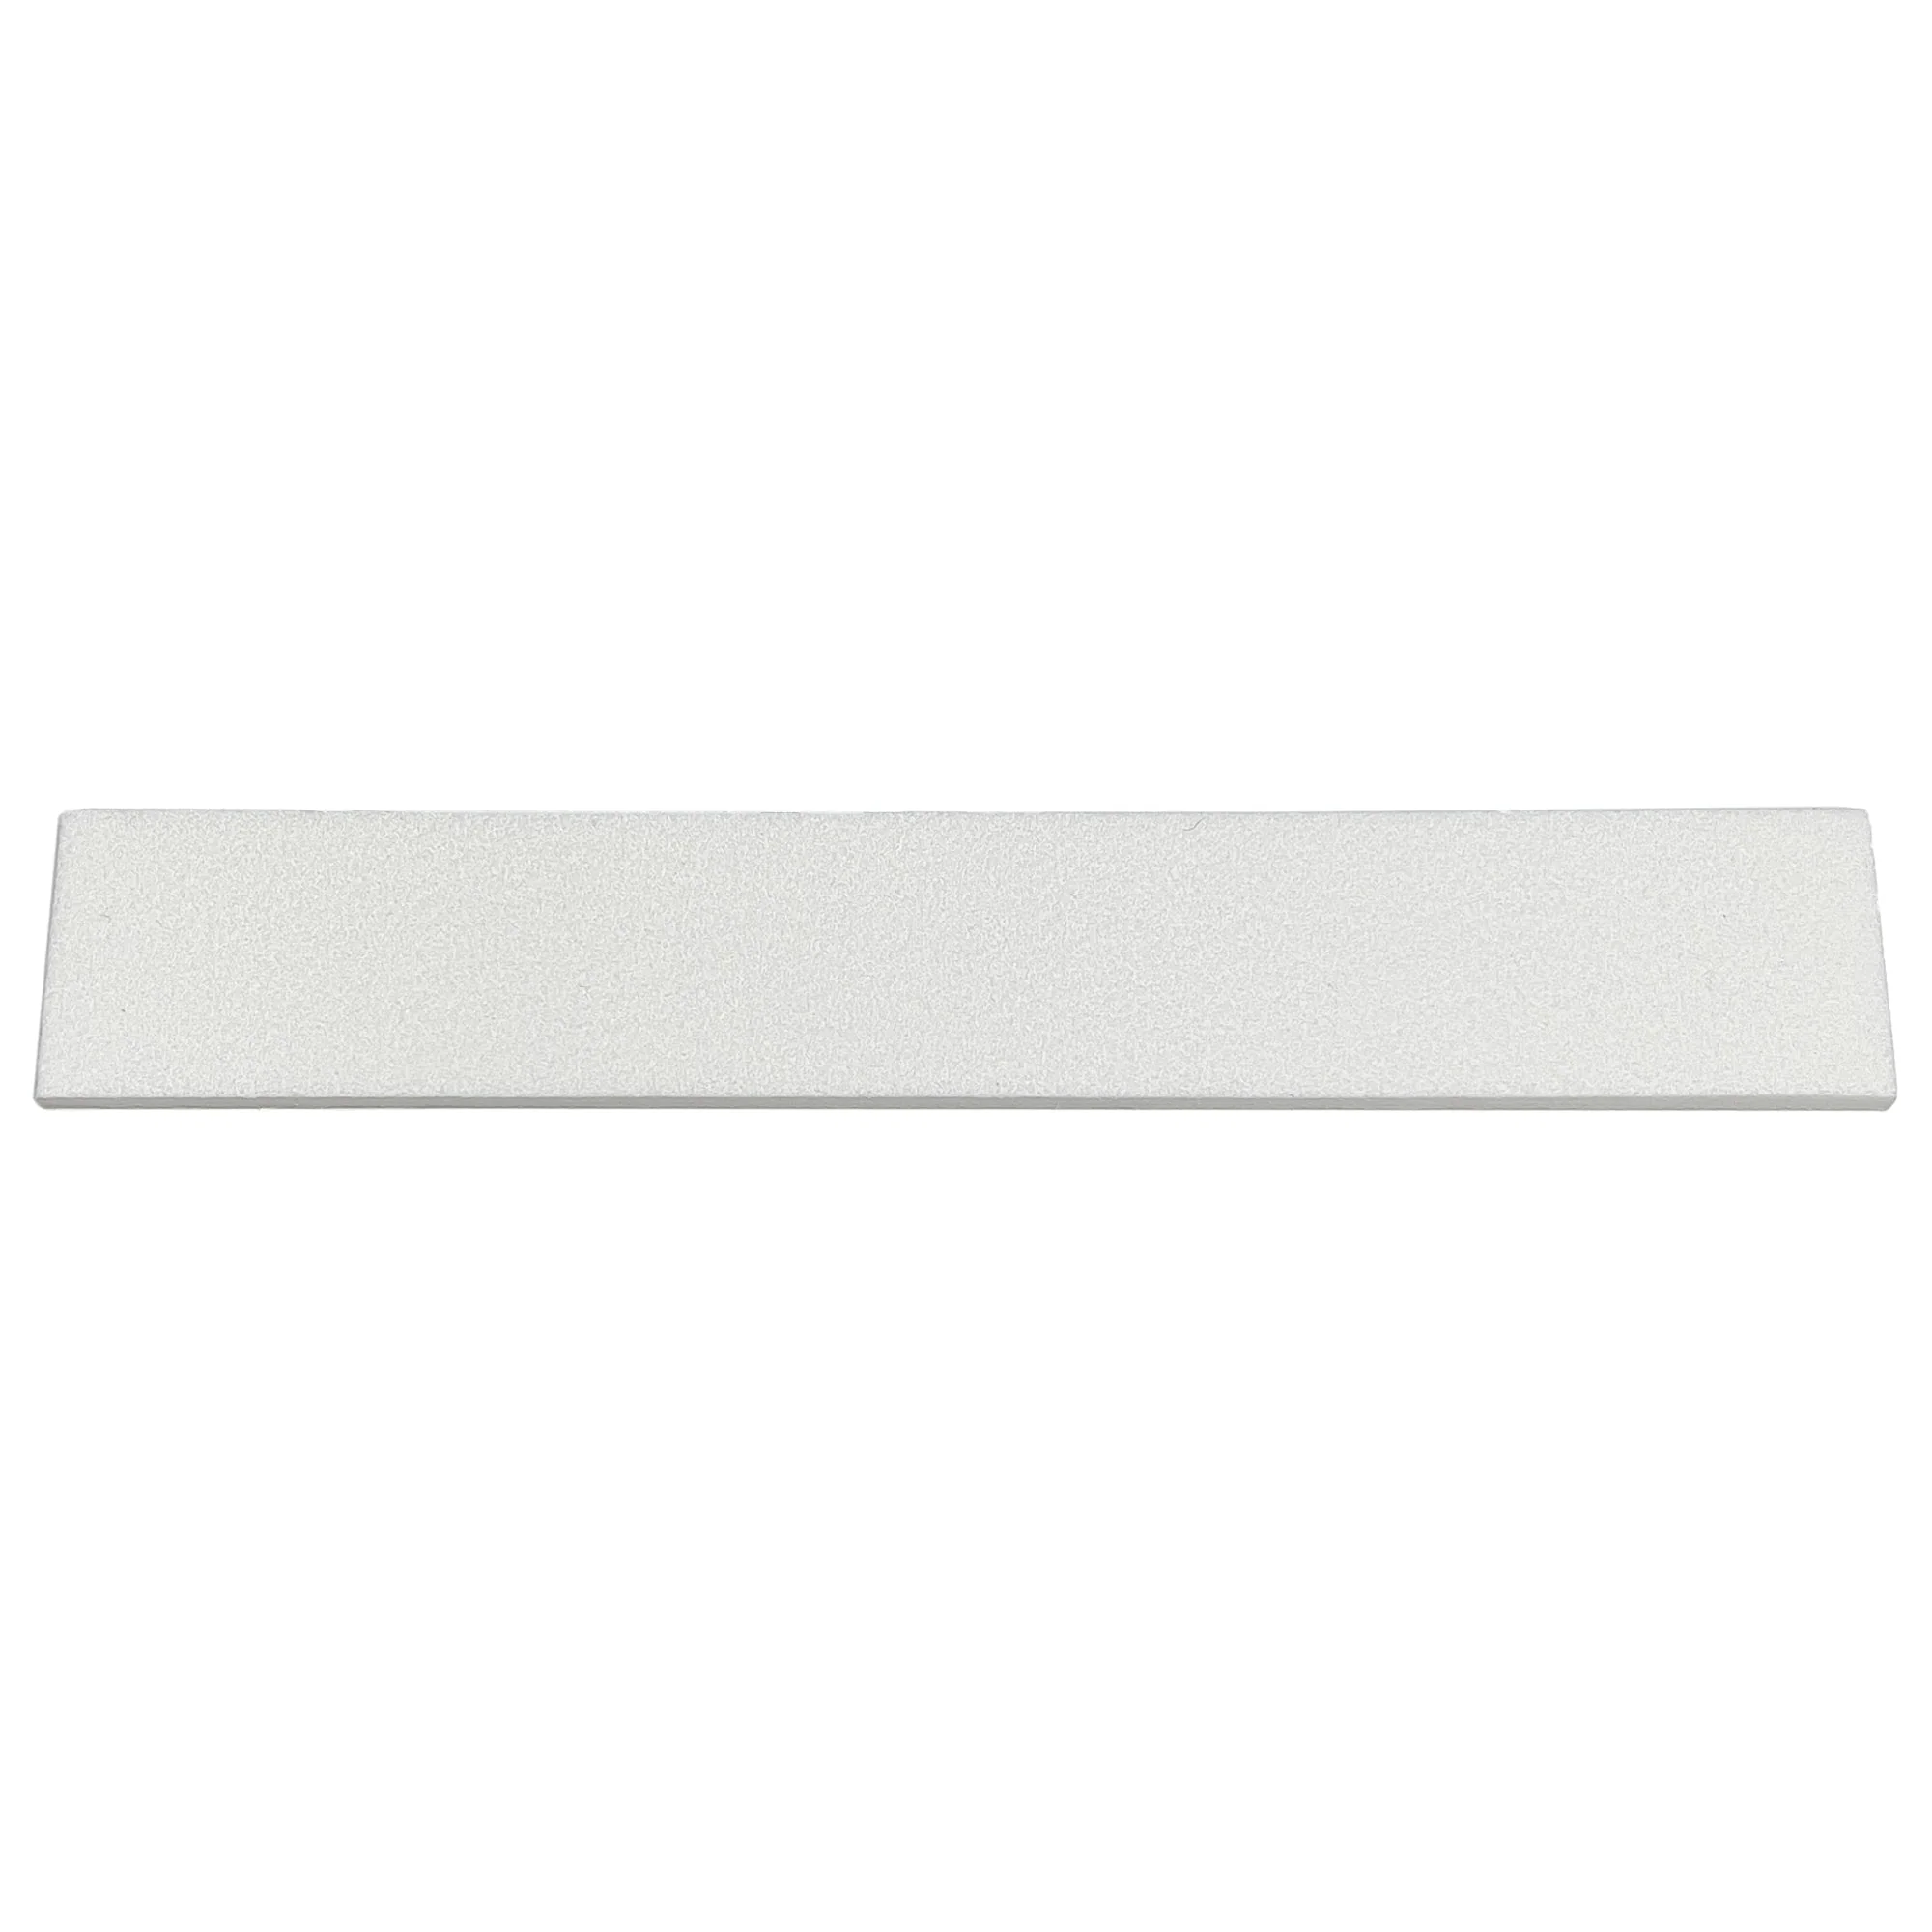 Hi, do you recommend using this aluminium blank with the Gunny Cloth?